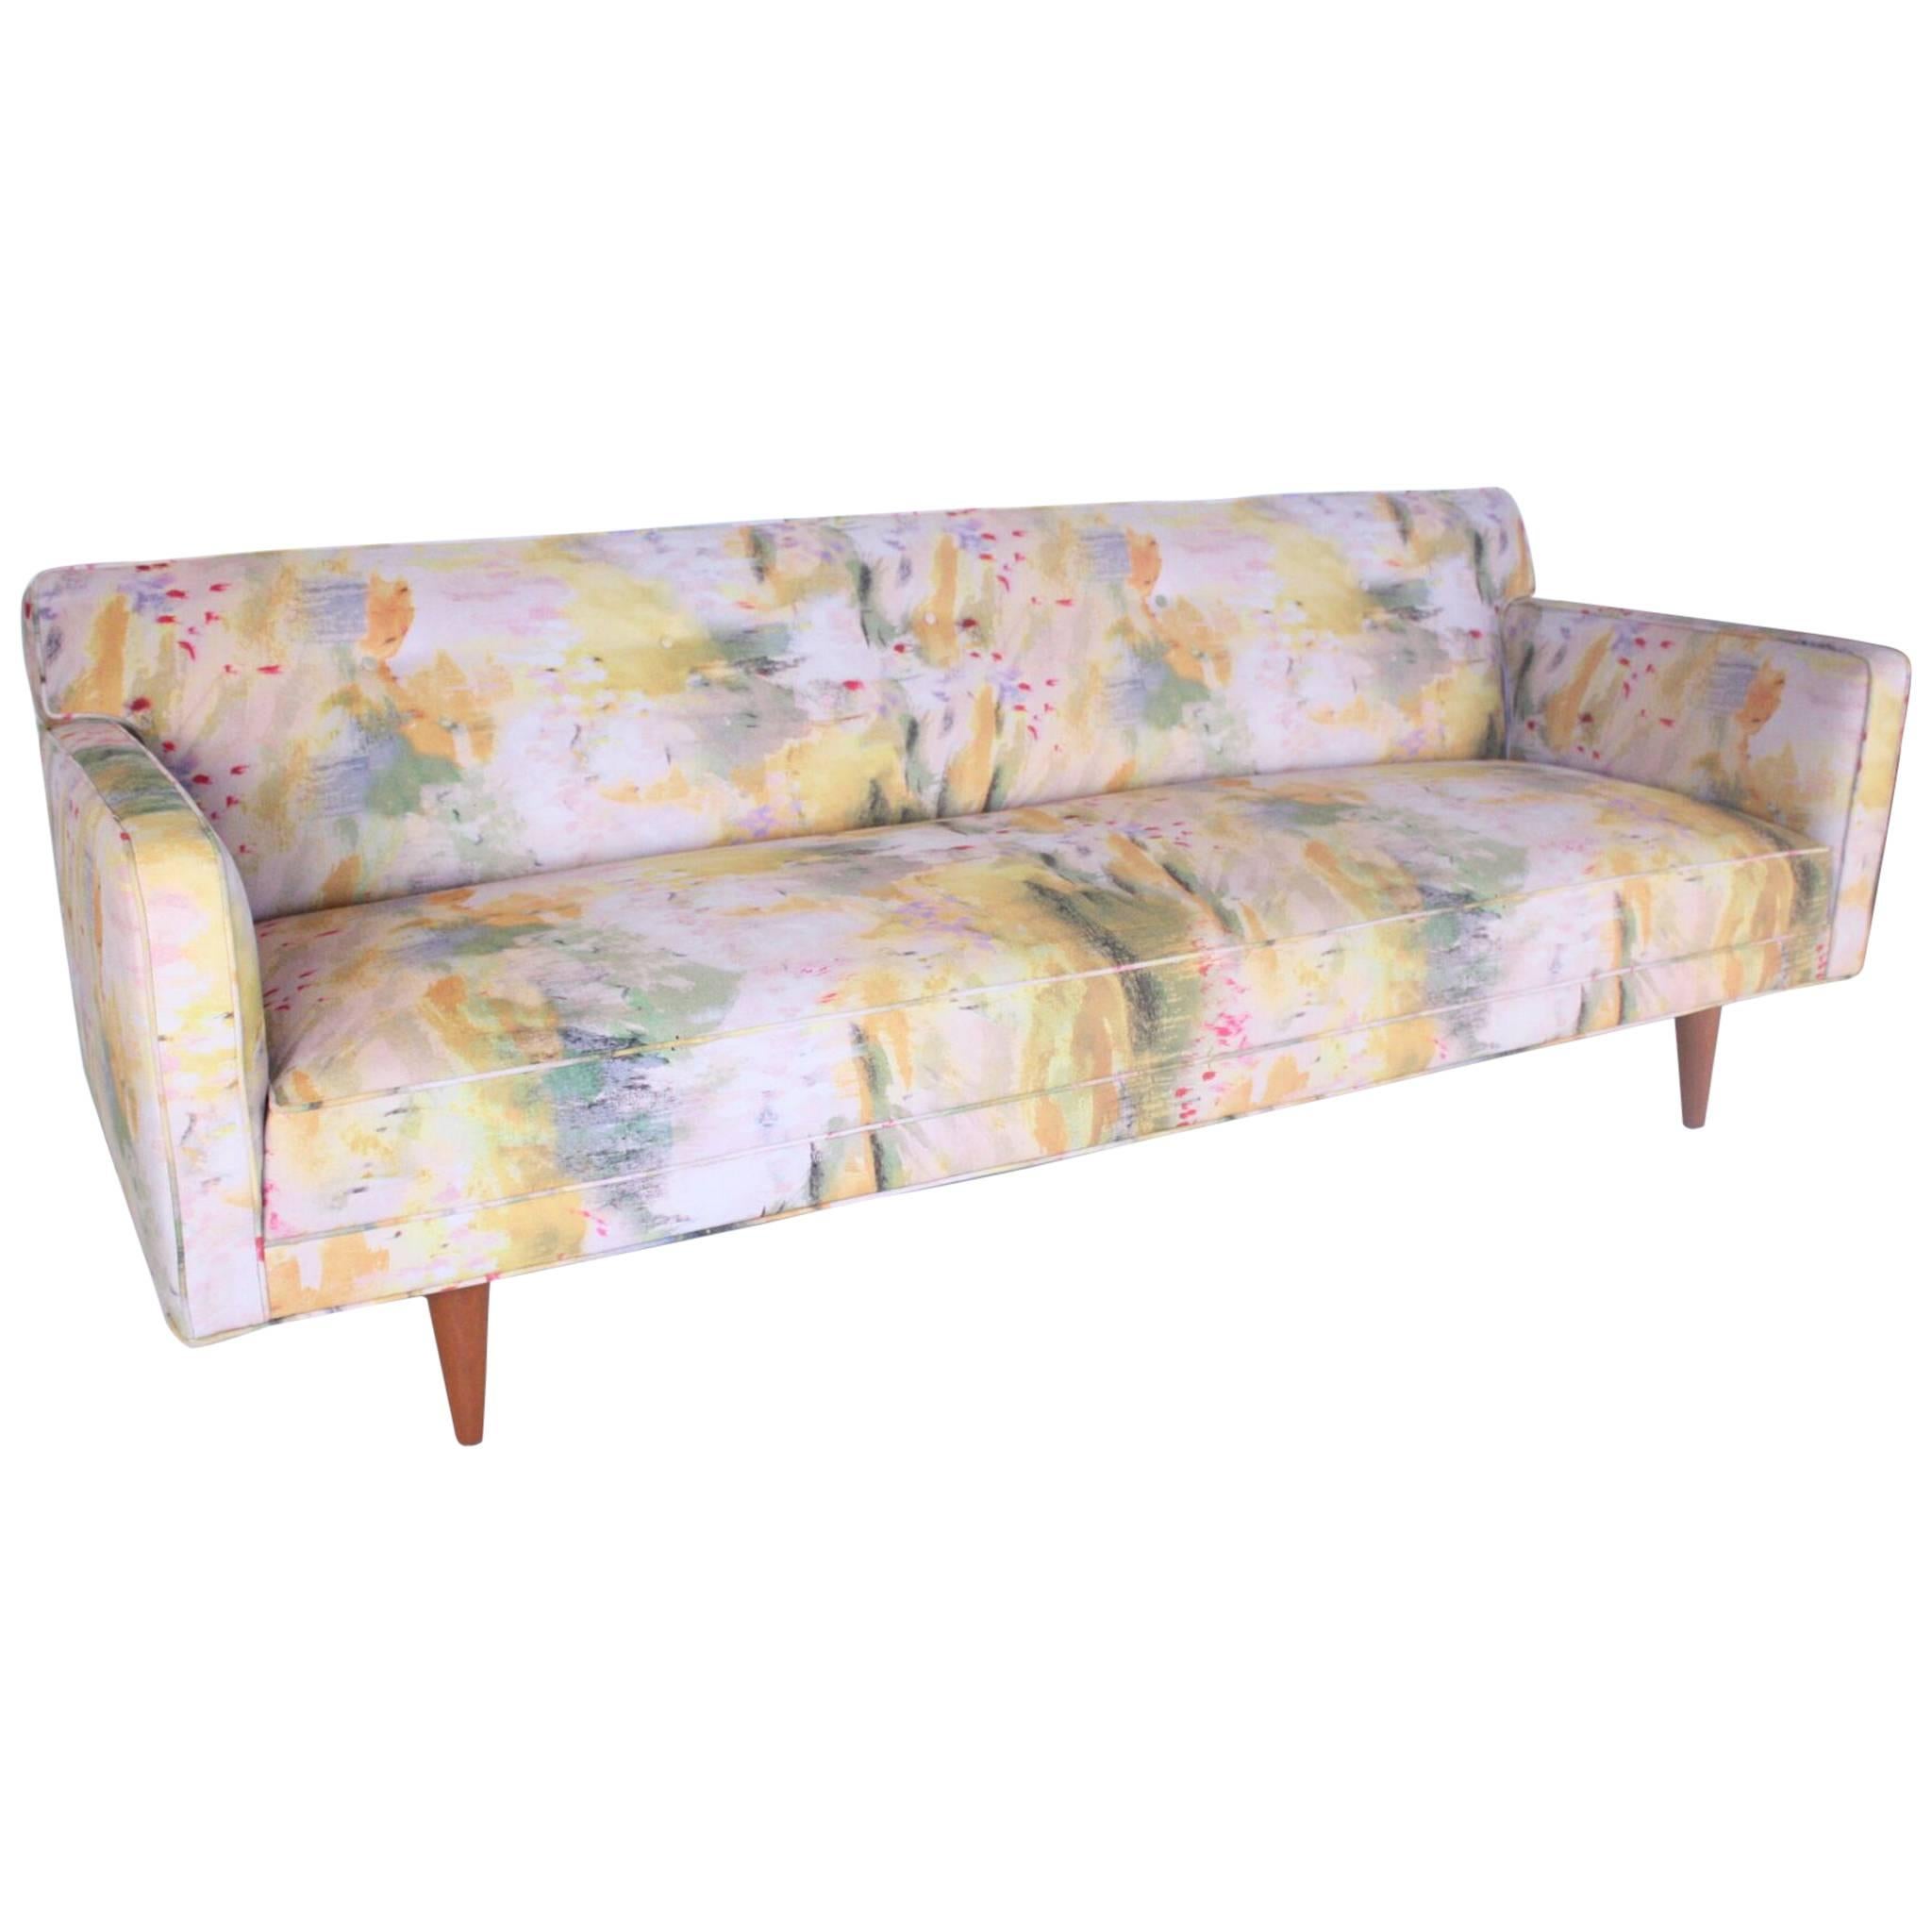 Mid-Century Sofa Attributed to Dunbar and Upholstered in Genevieve Lévy Fabric